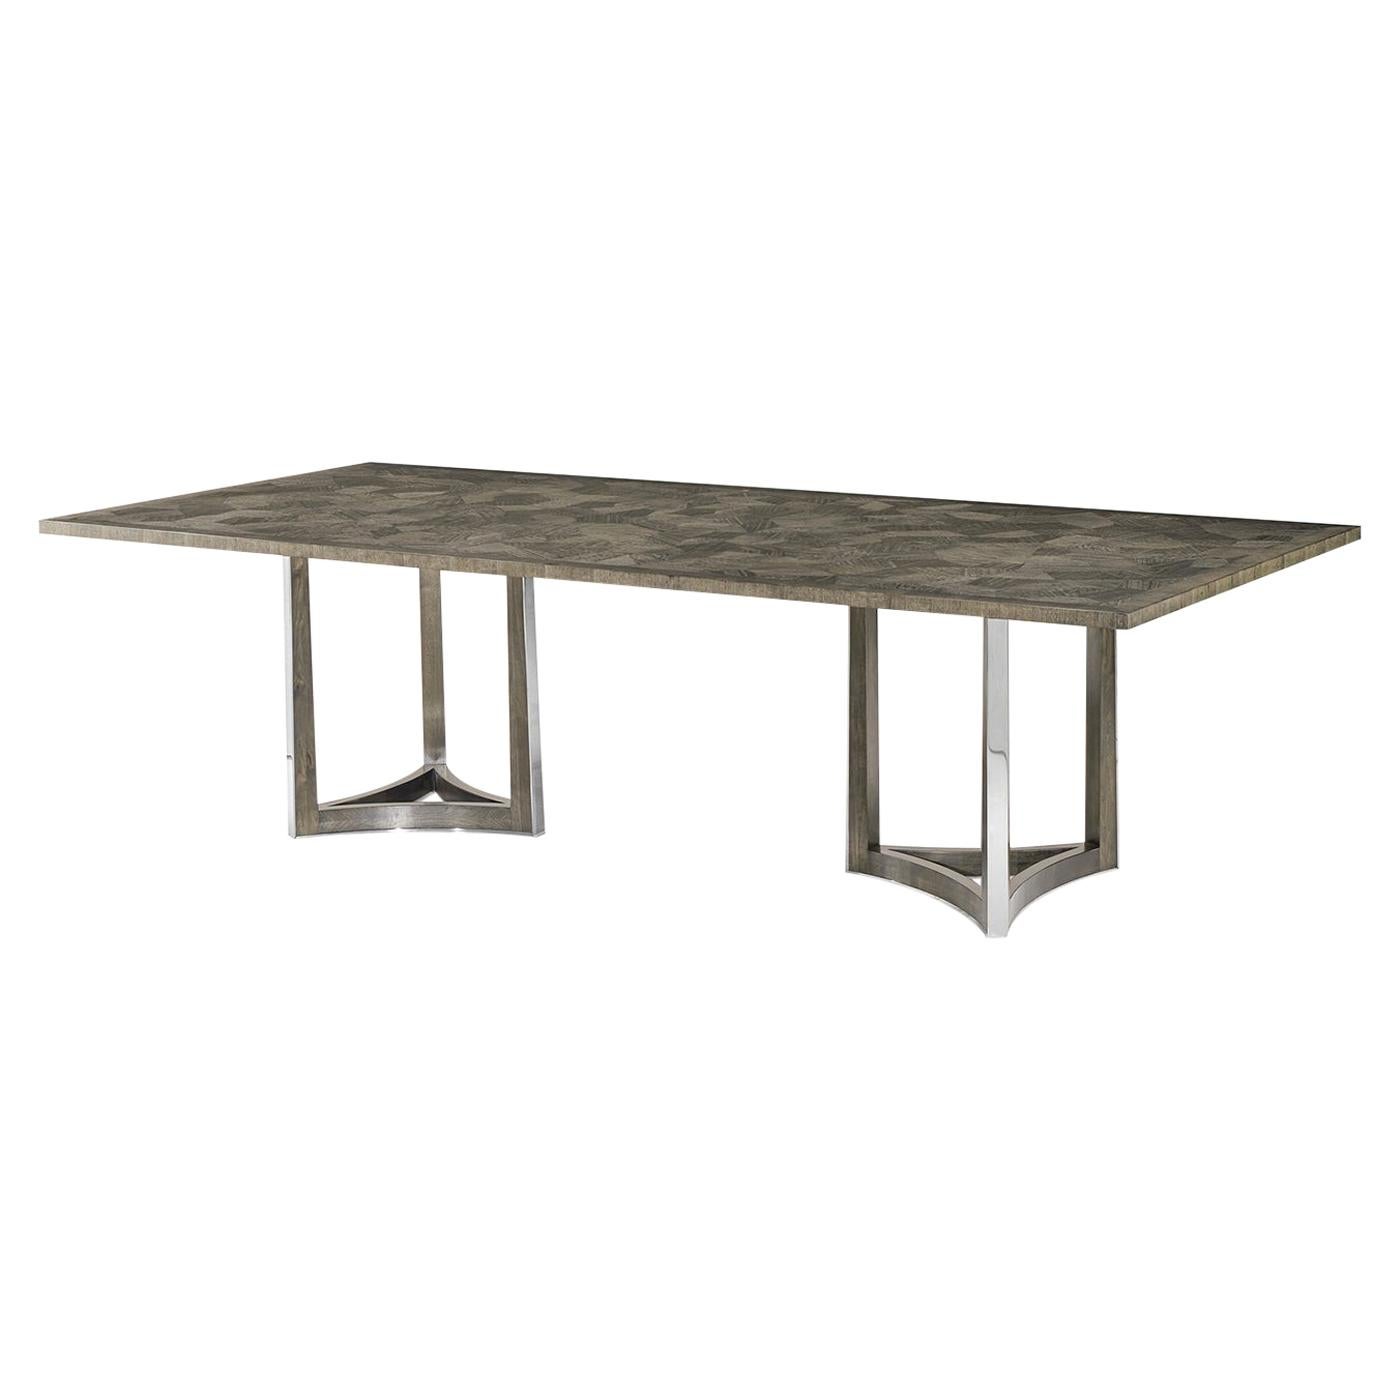 Art Deco Stainless Steel Base Dining Table